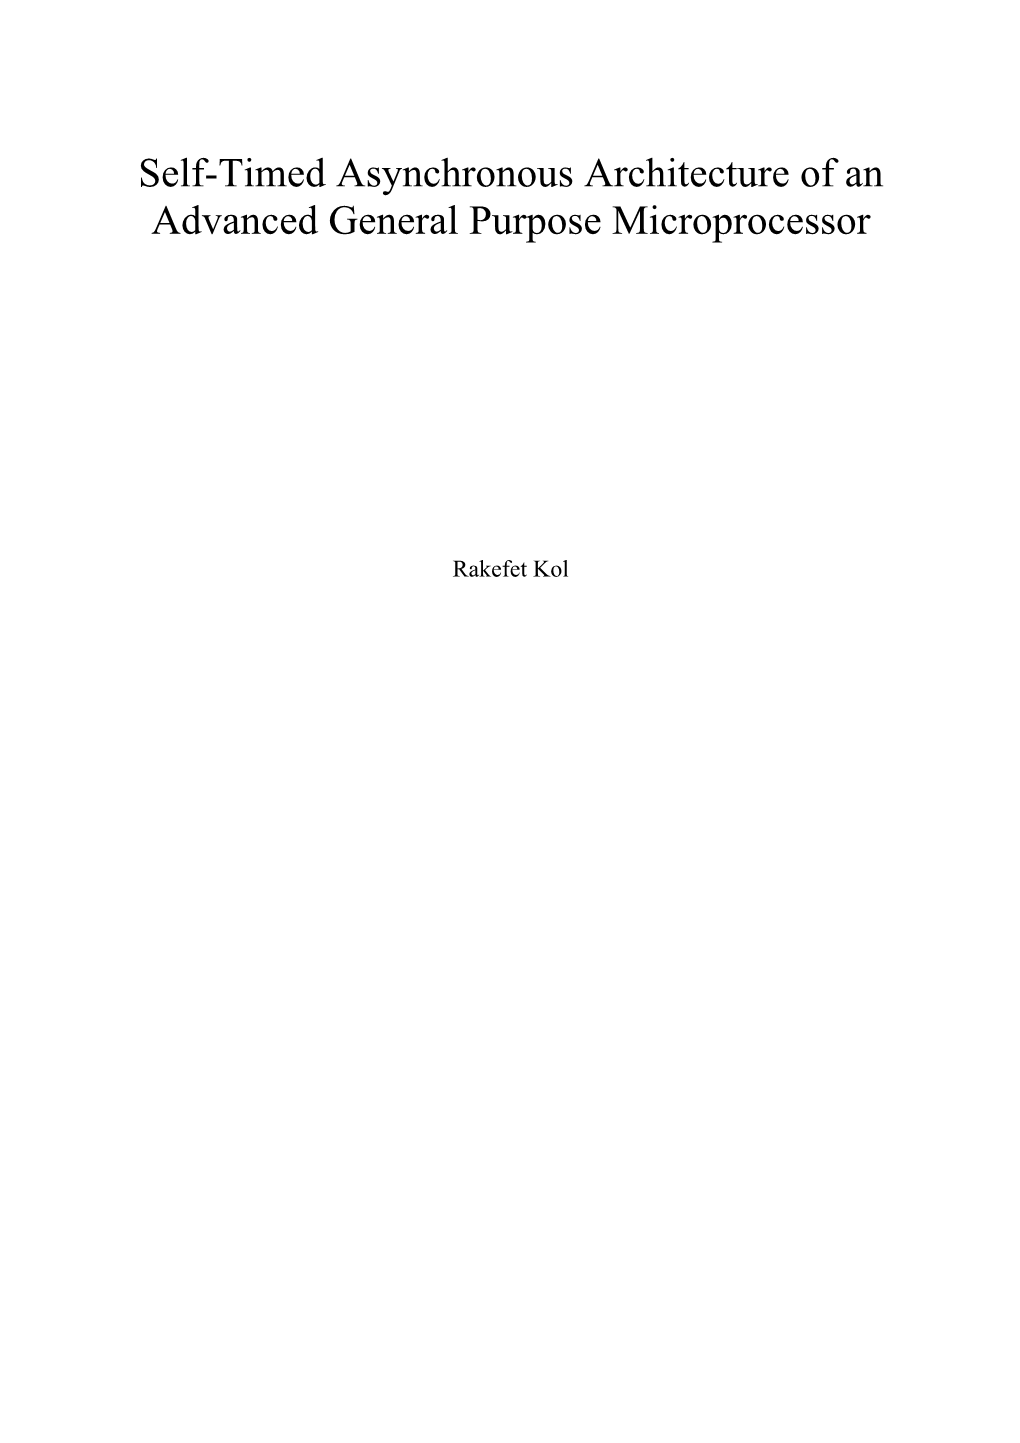 Self-Timed Asynchronous Architecture of an Advanced General Purpose Microprocessor